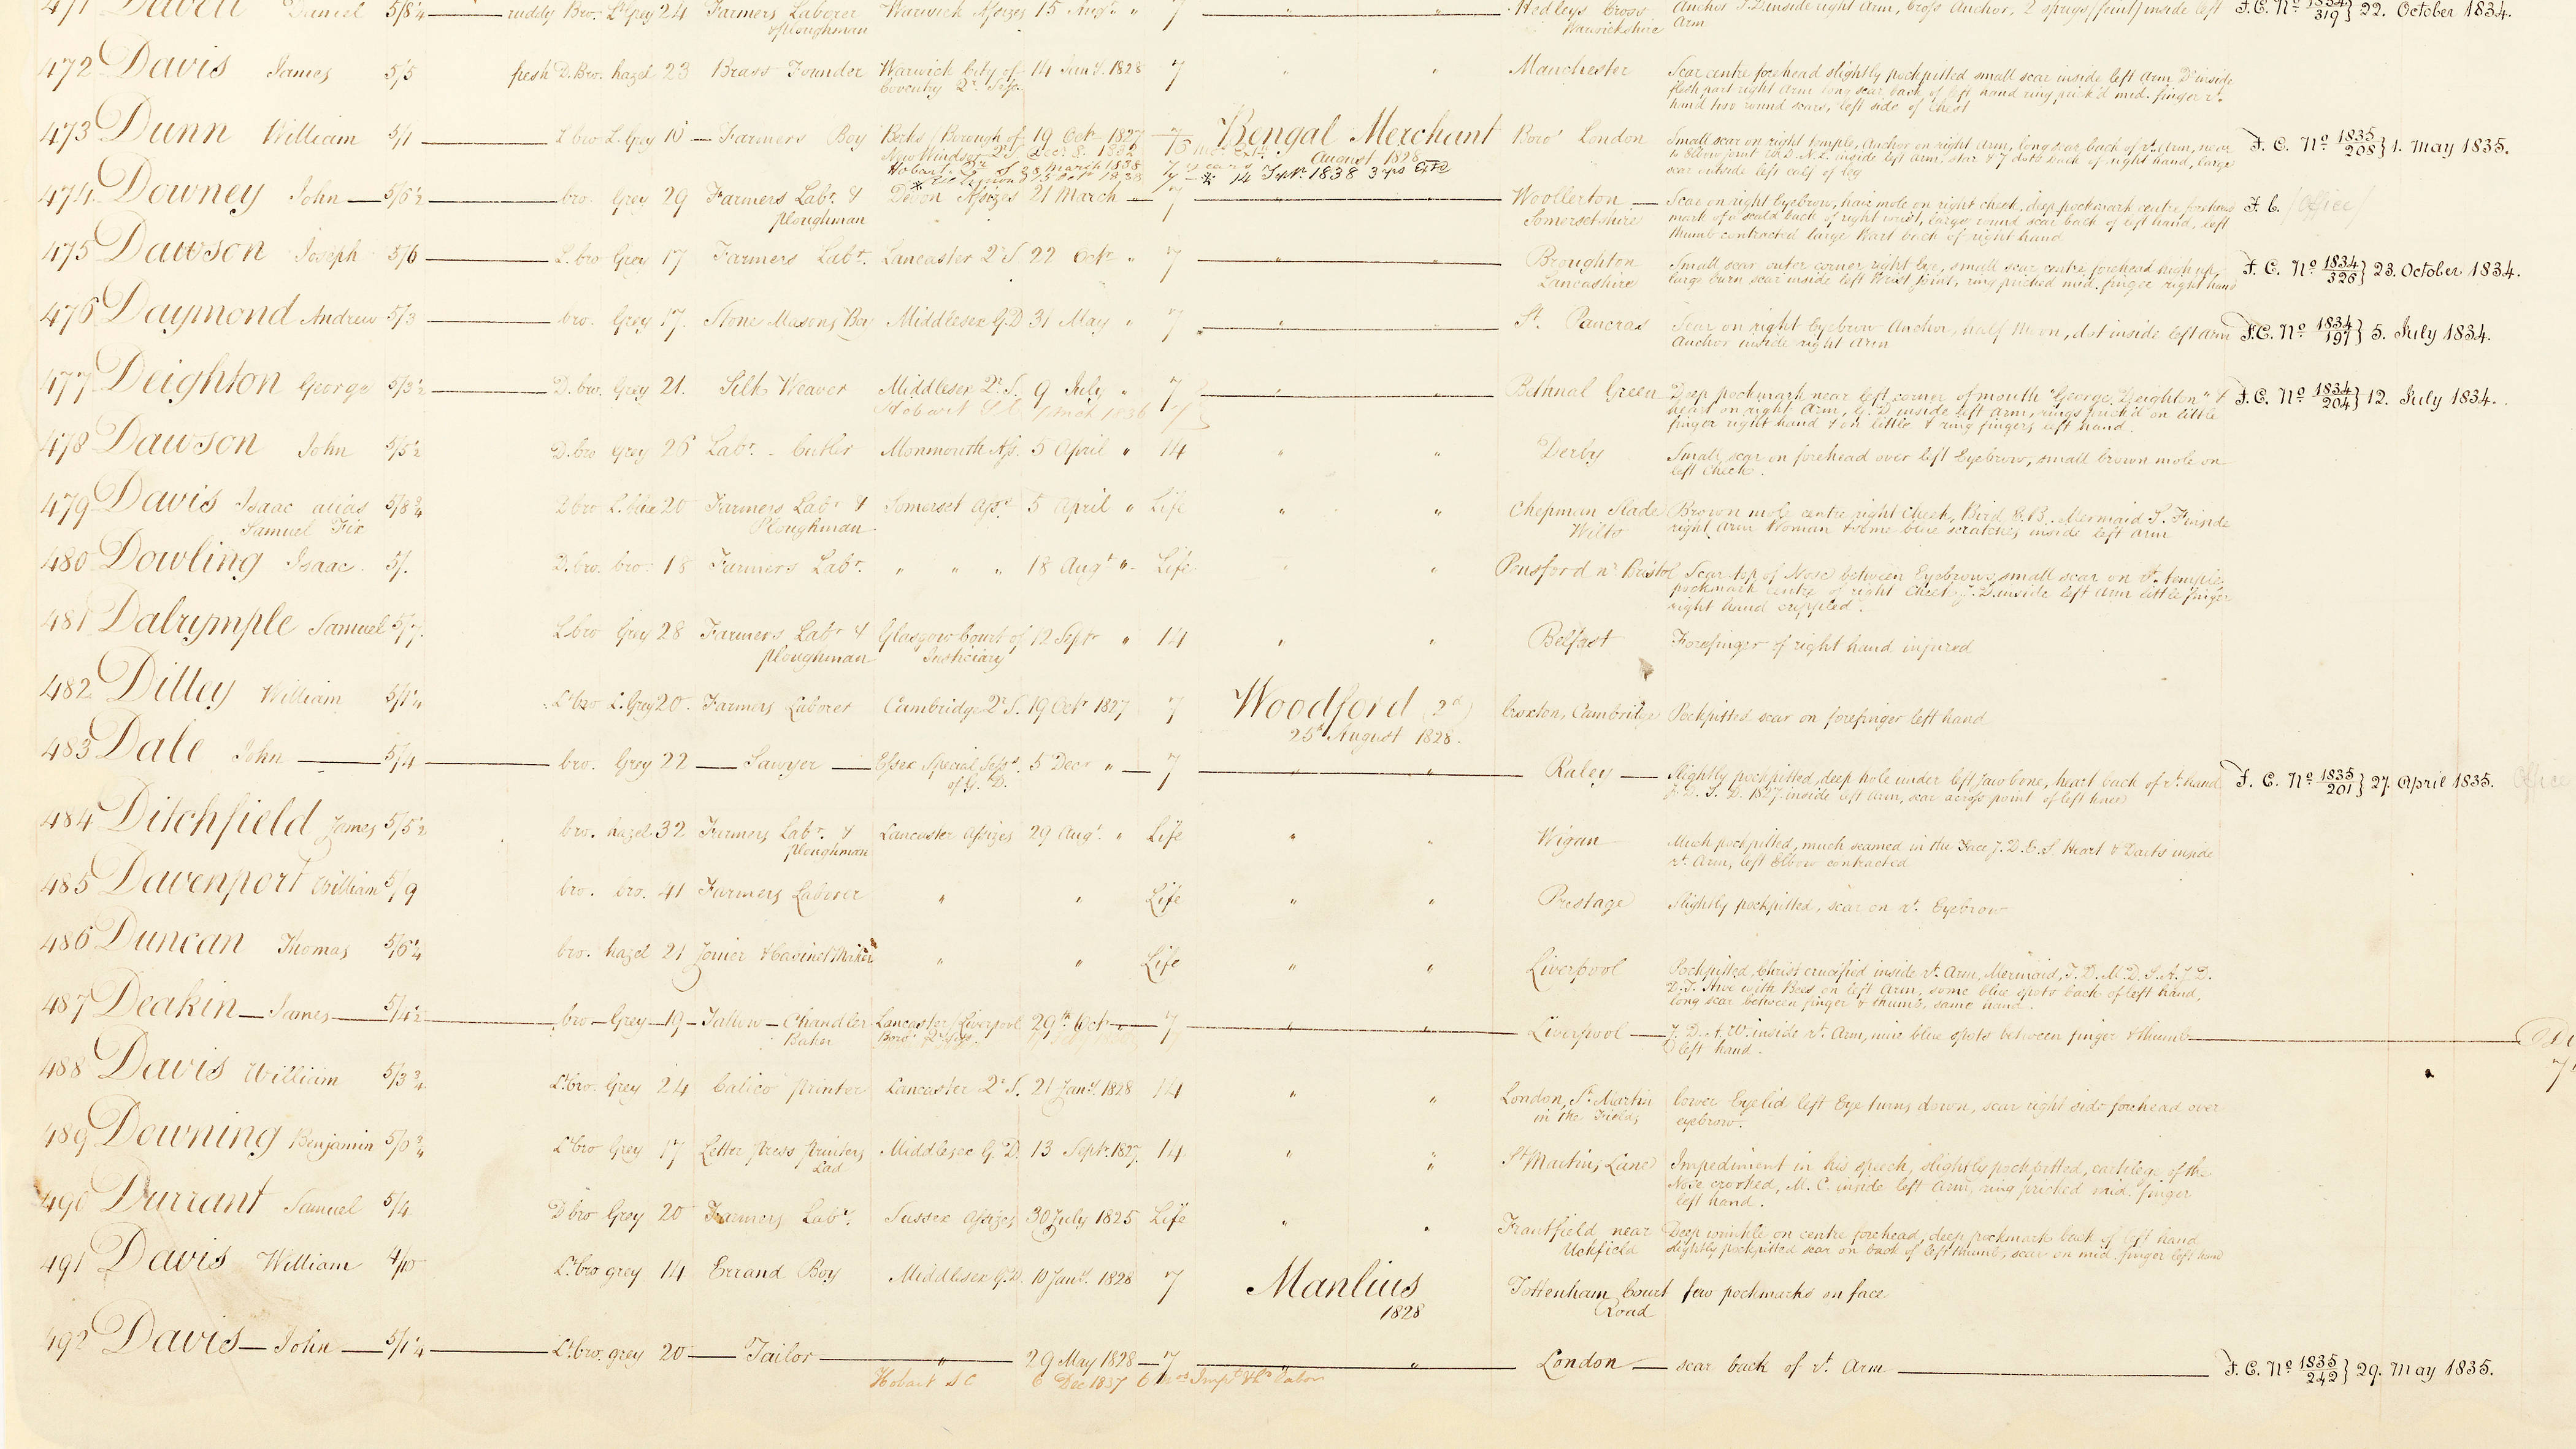 Excerpt from ledgers held as part of Brickendon Estate’s archives mentioning James Ditchfield.